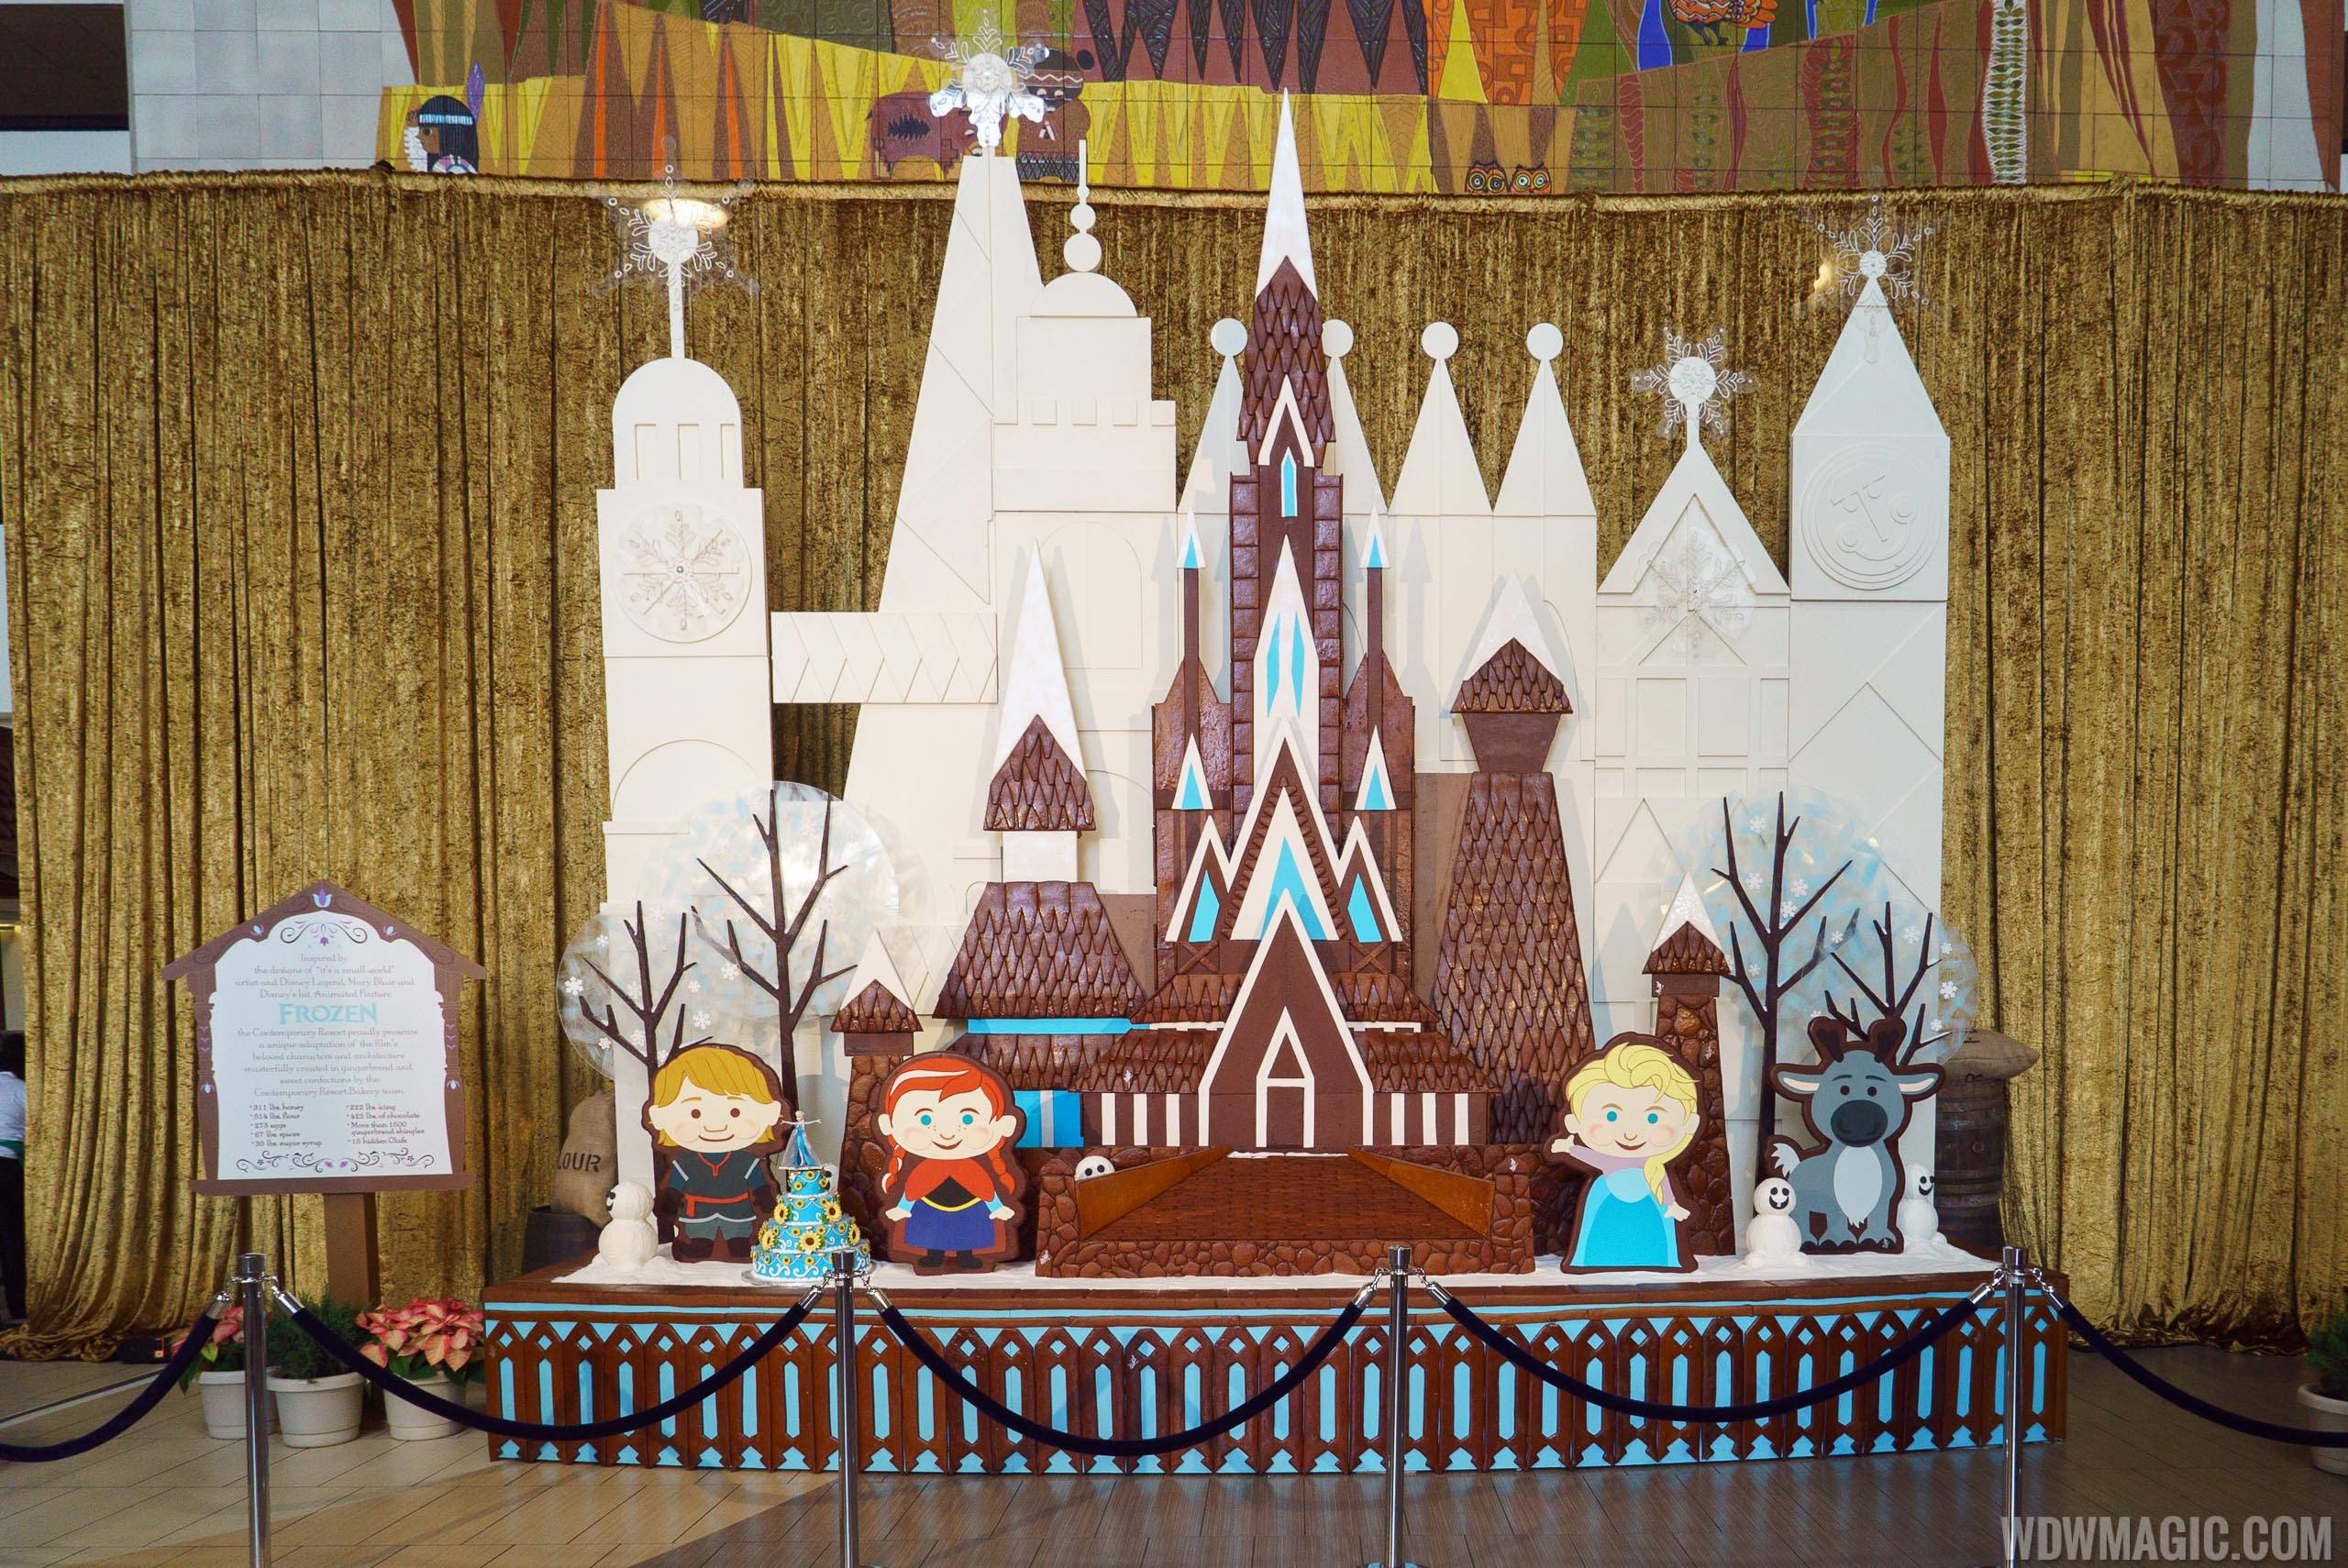 PHOTOS - Frozen themed Gingerbread House at Disney's Contemporary Resort